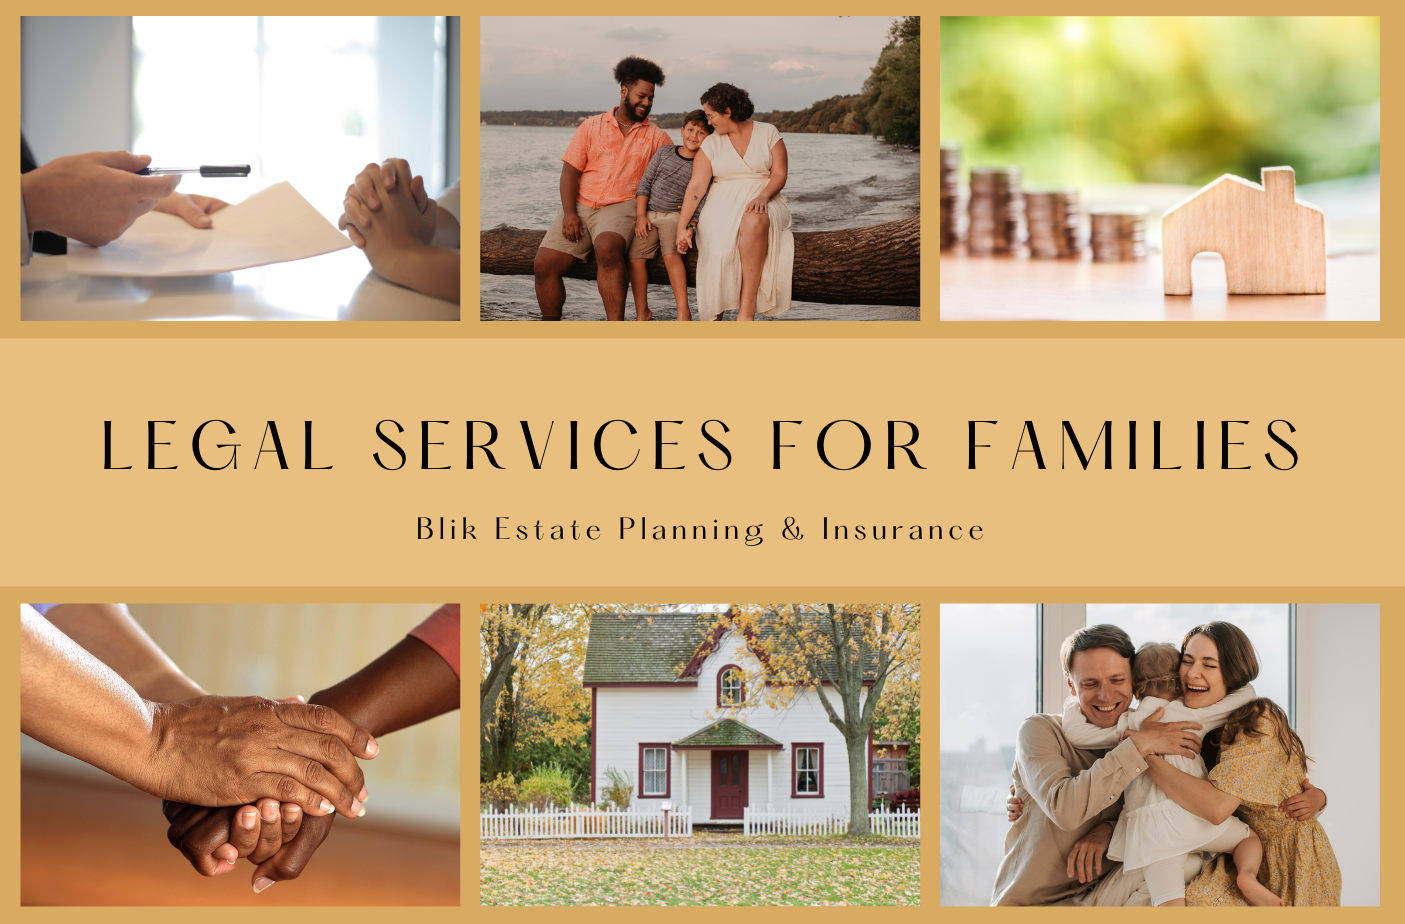 Will Writing Service for Families - kidelp